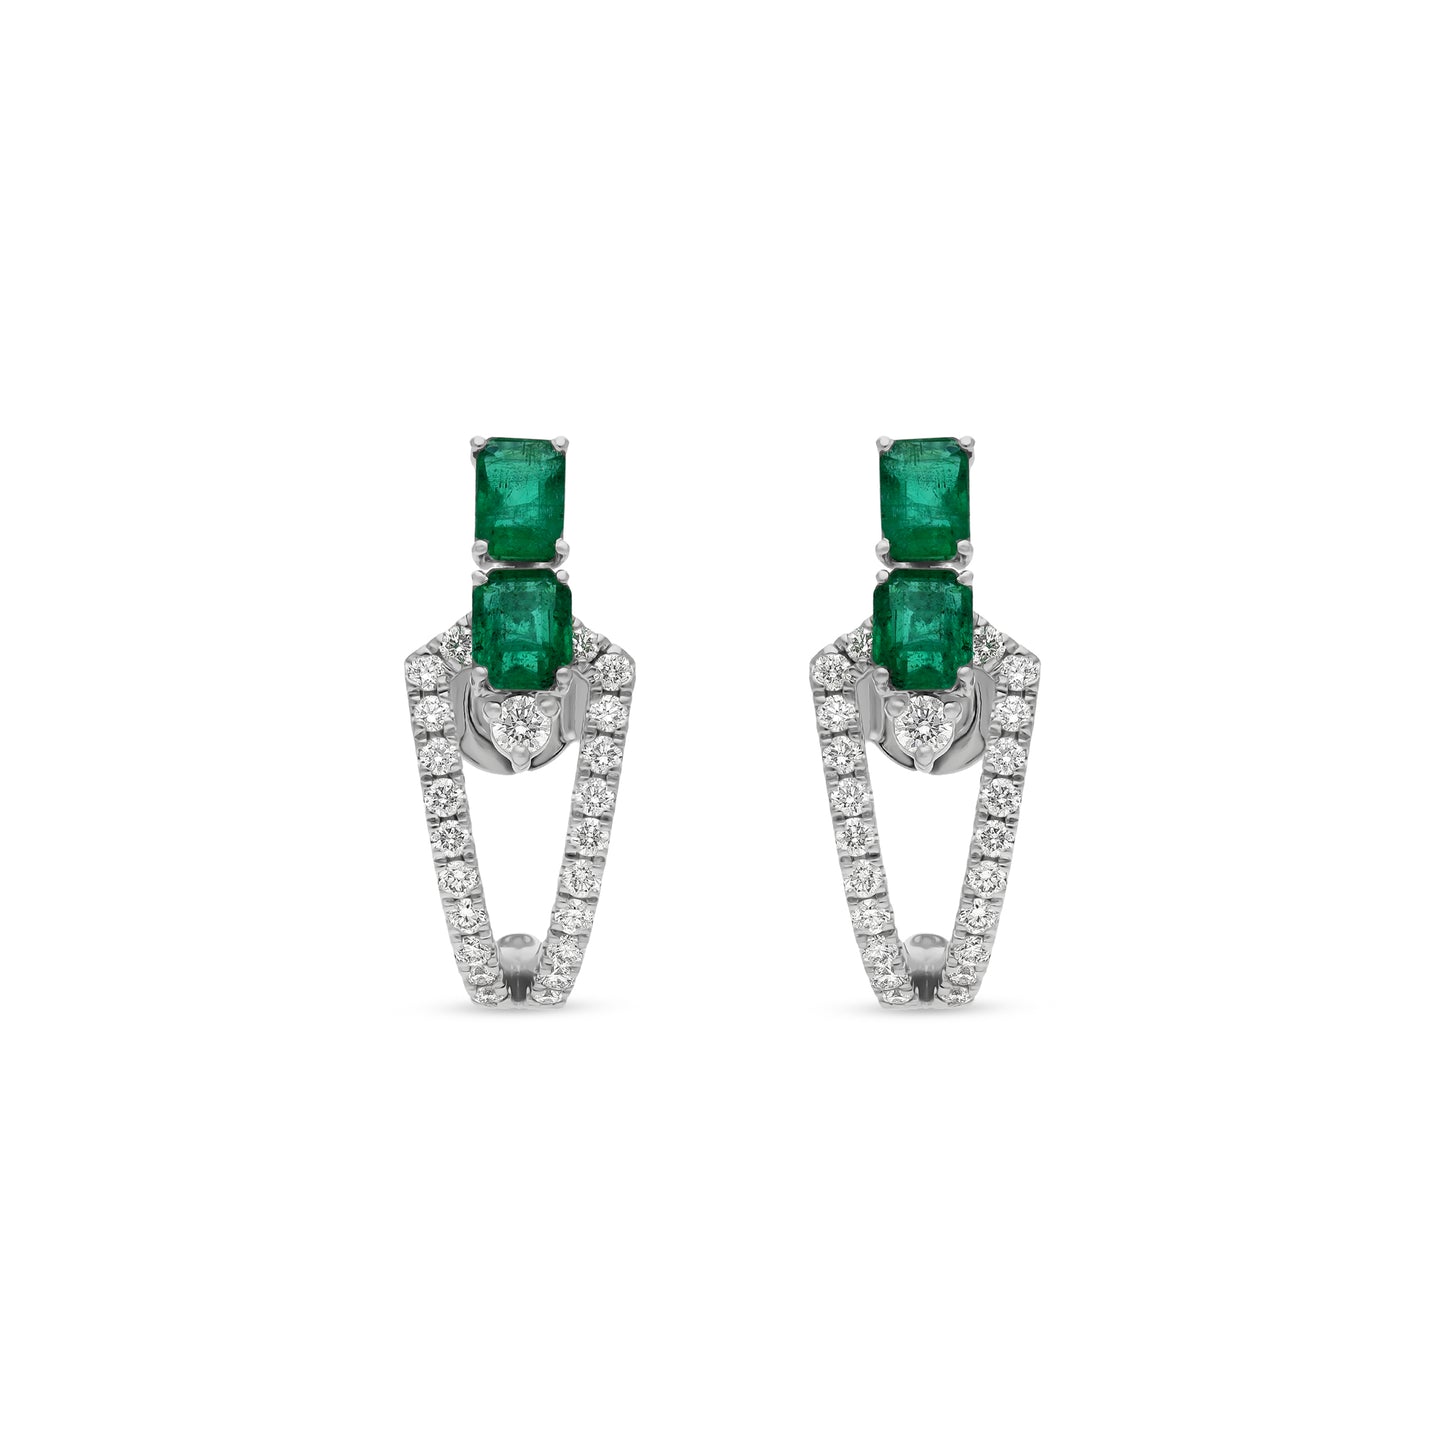 Double Green Emerald Shape With Round Diamond White Gold Stud Earrings